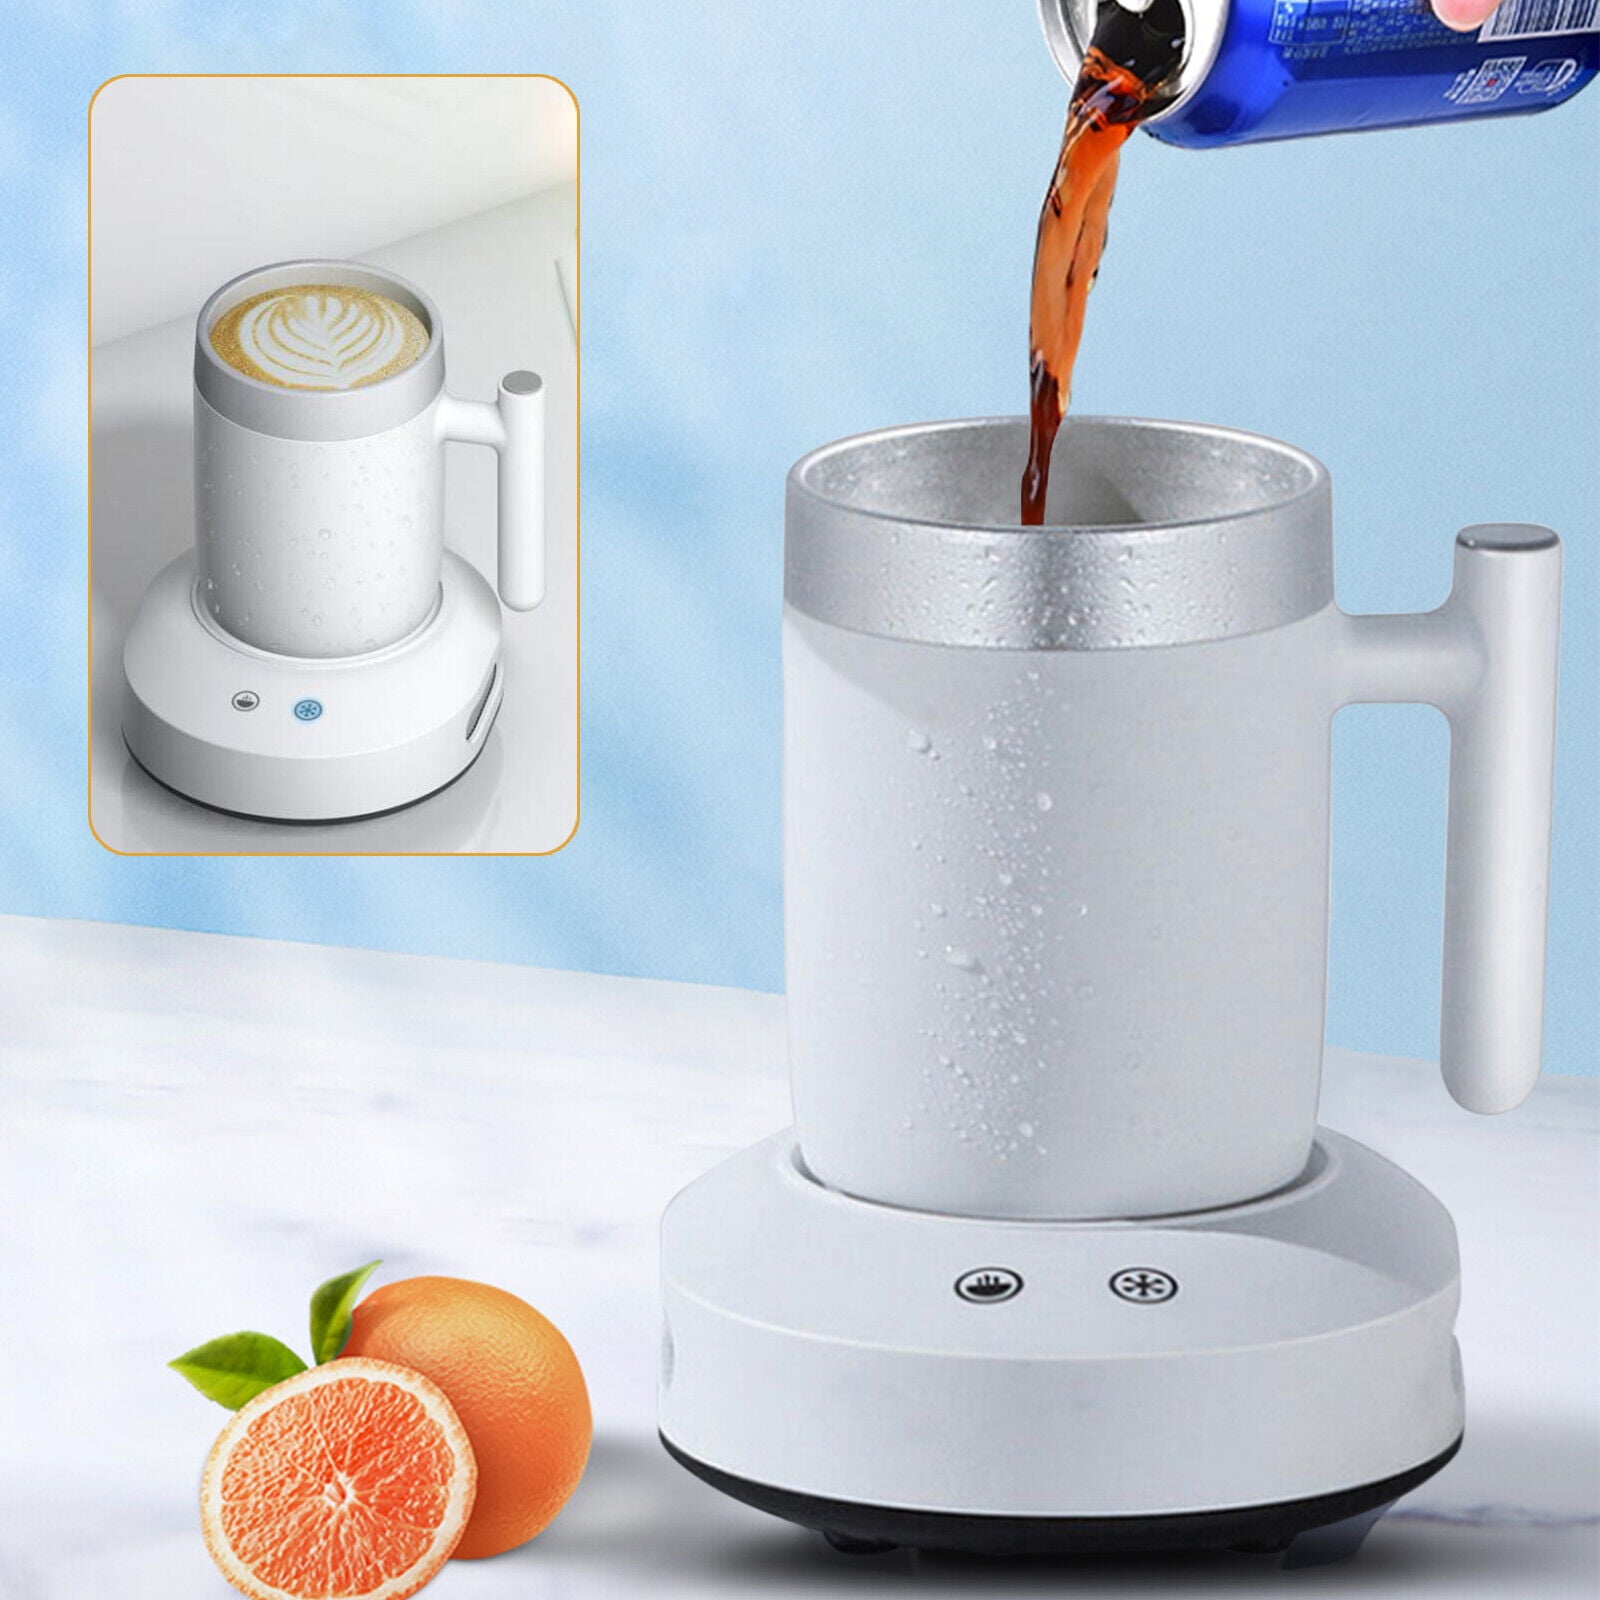 Airpow 2-in-1 Portable Car Cup Warmer Cooler Smart Cup Mug Holder Freezing  Heater Cups for Whiskey Cocktail Beer Coffee Tea 